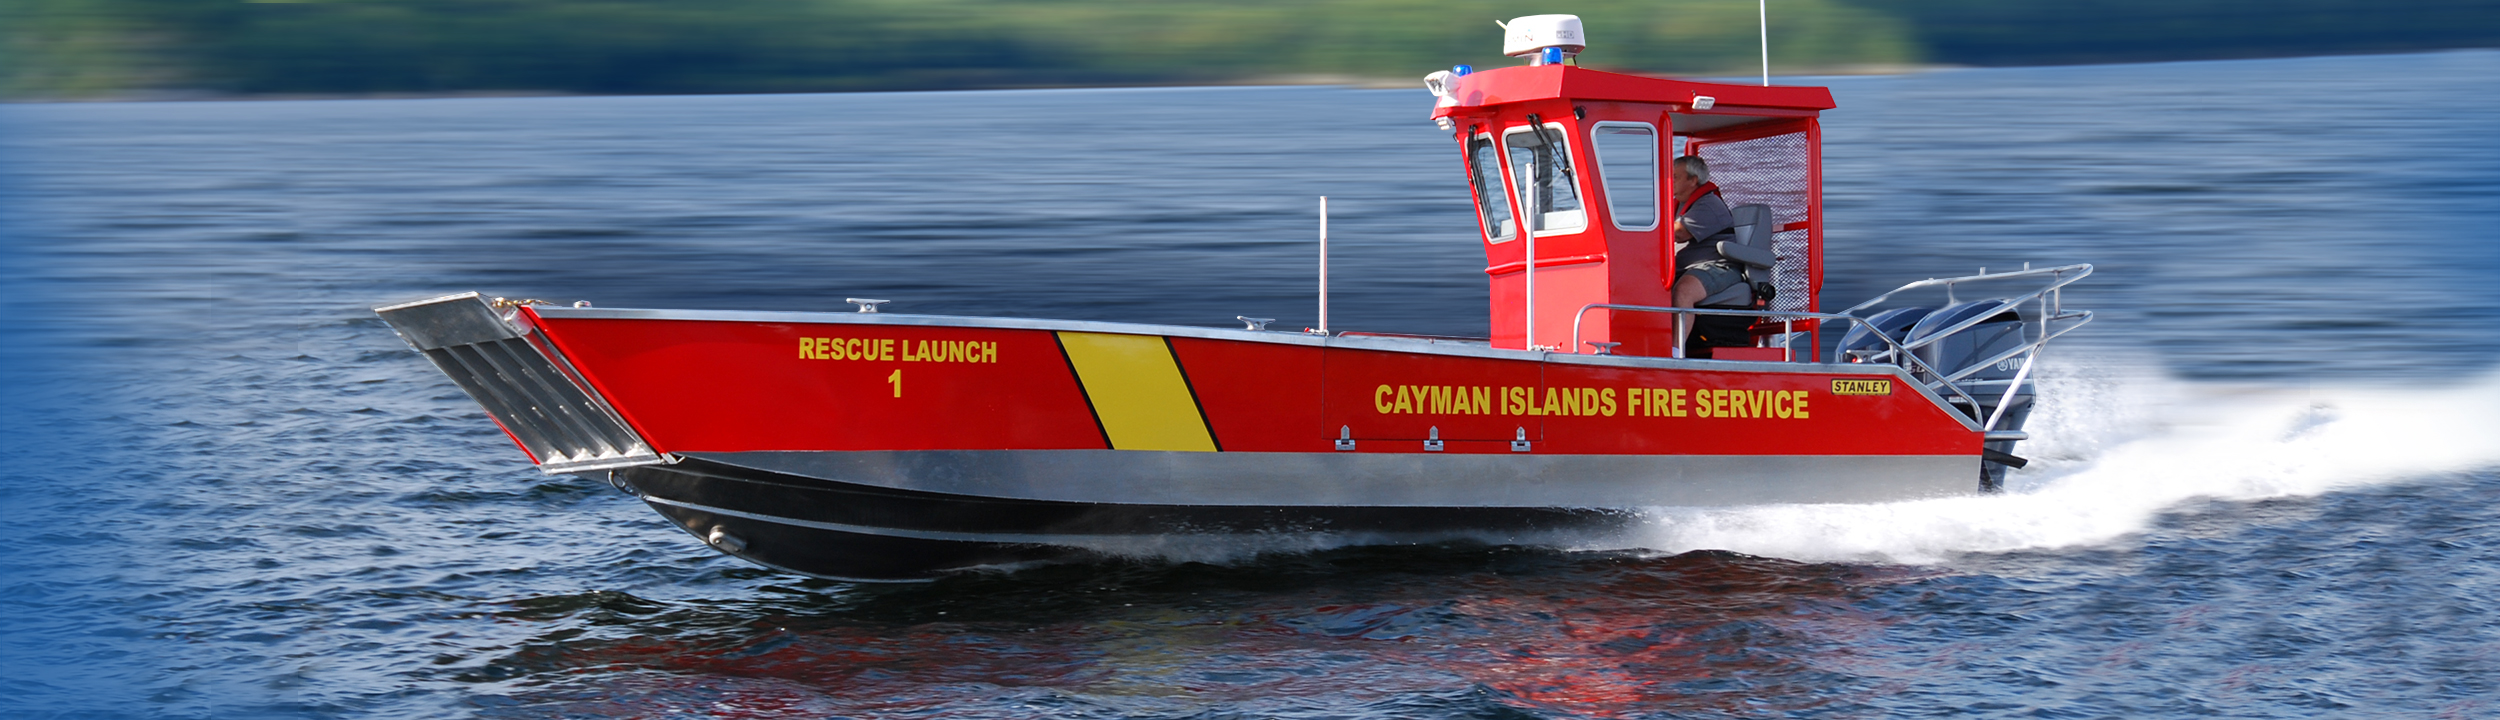 Welded Aluminum Fire Rescue Boat